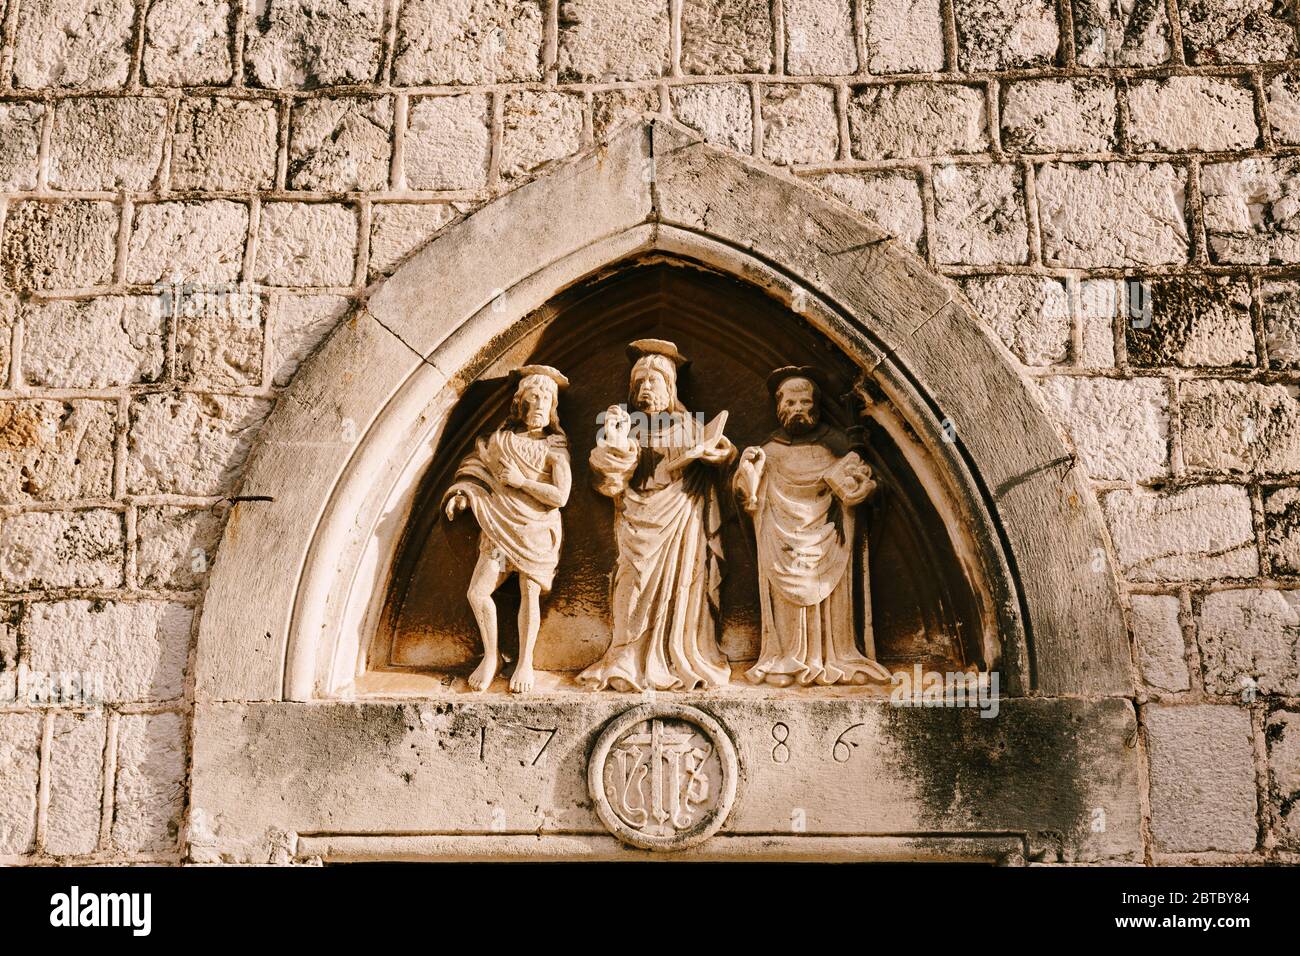 Close-up stone statues, bas-reliefs and high reliefs on the walls of the old city of Dubrovnik, Croatia. Stock Photo